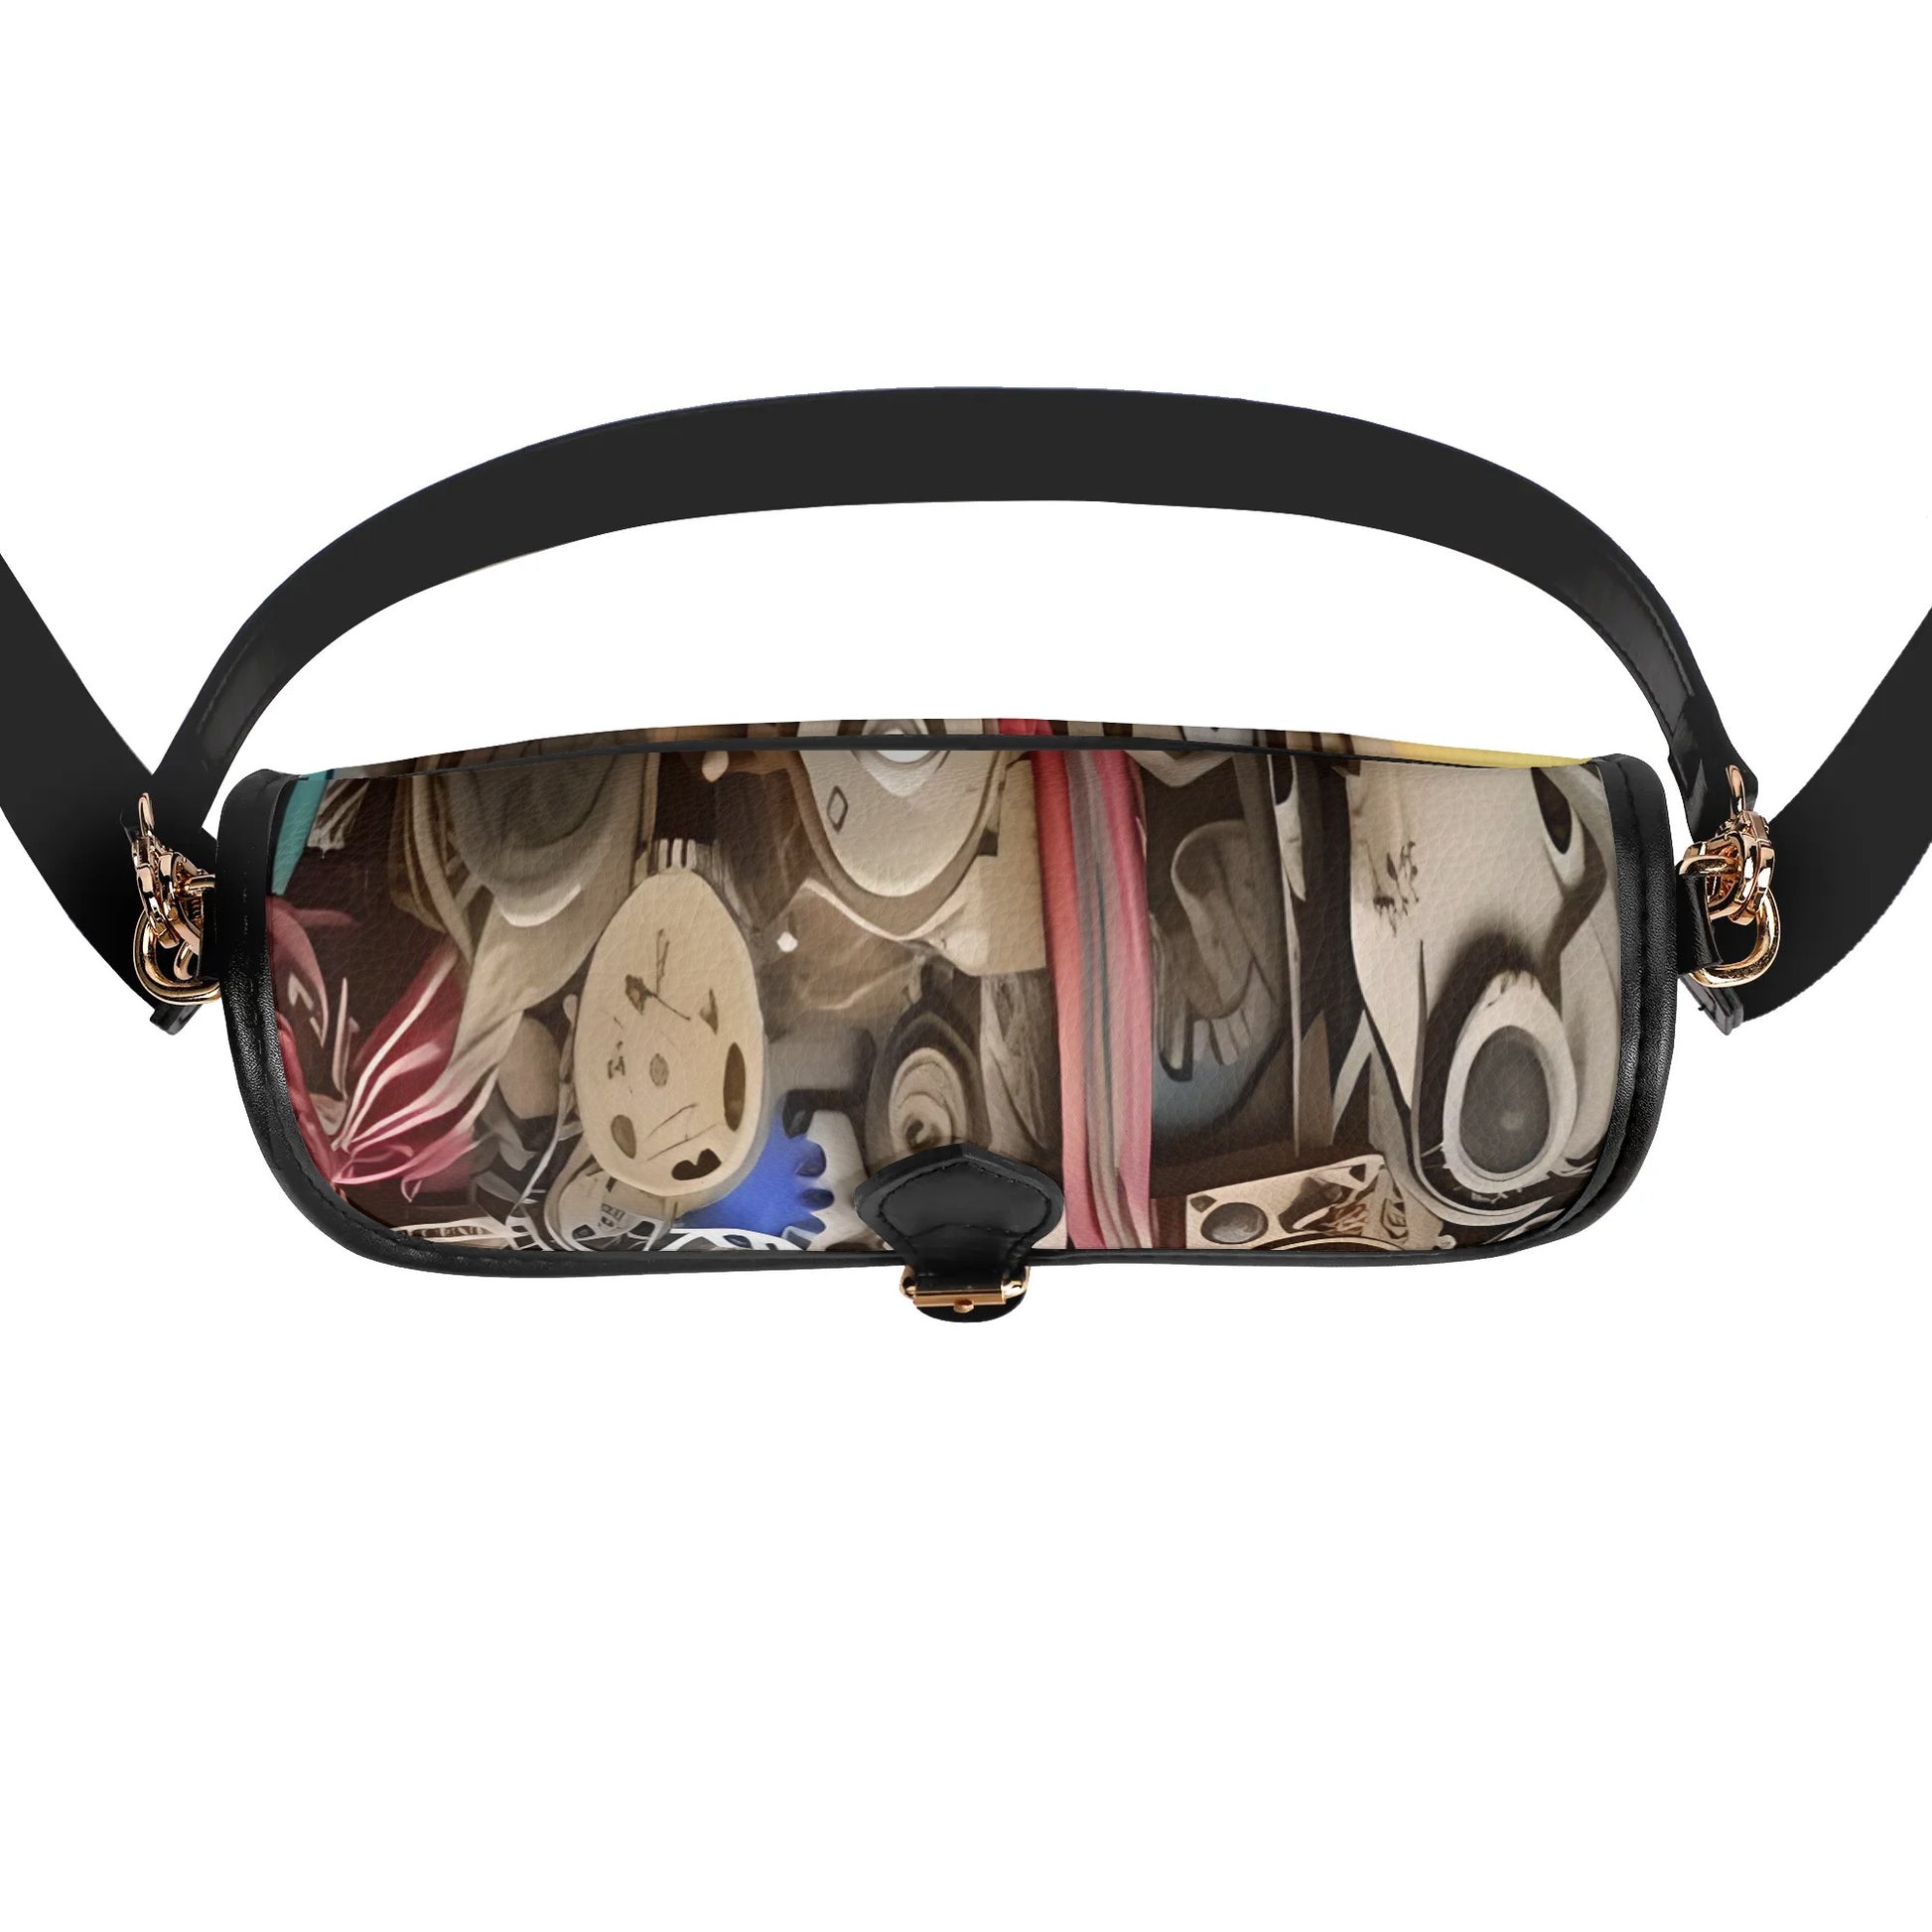 Womens Certified ShitHot Steampunk "The Speaker" Shoulder Bag